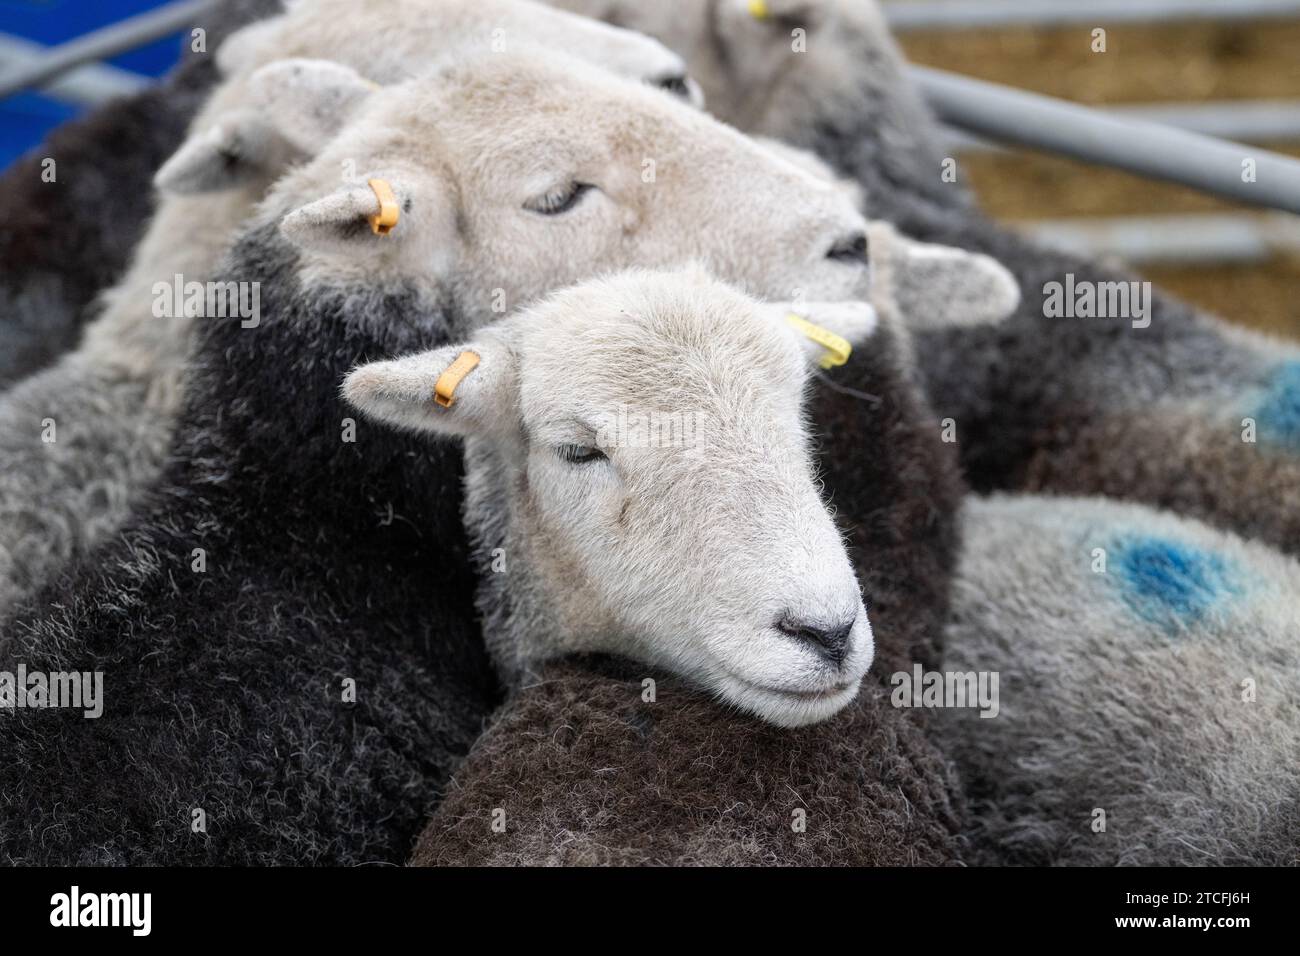 Sale of breeding hill ewes at Kendal Auction mart in Cumbria, UK. Stock Photo